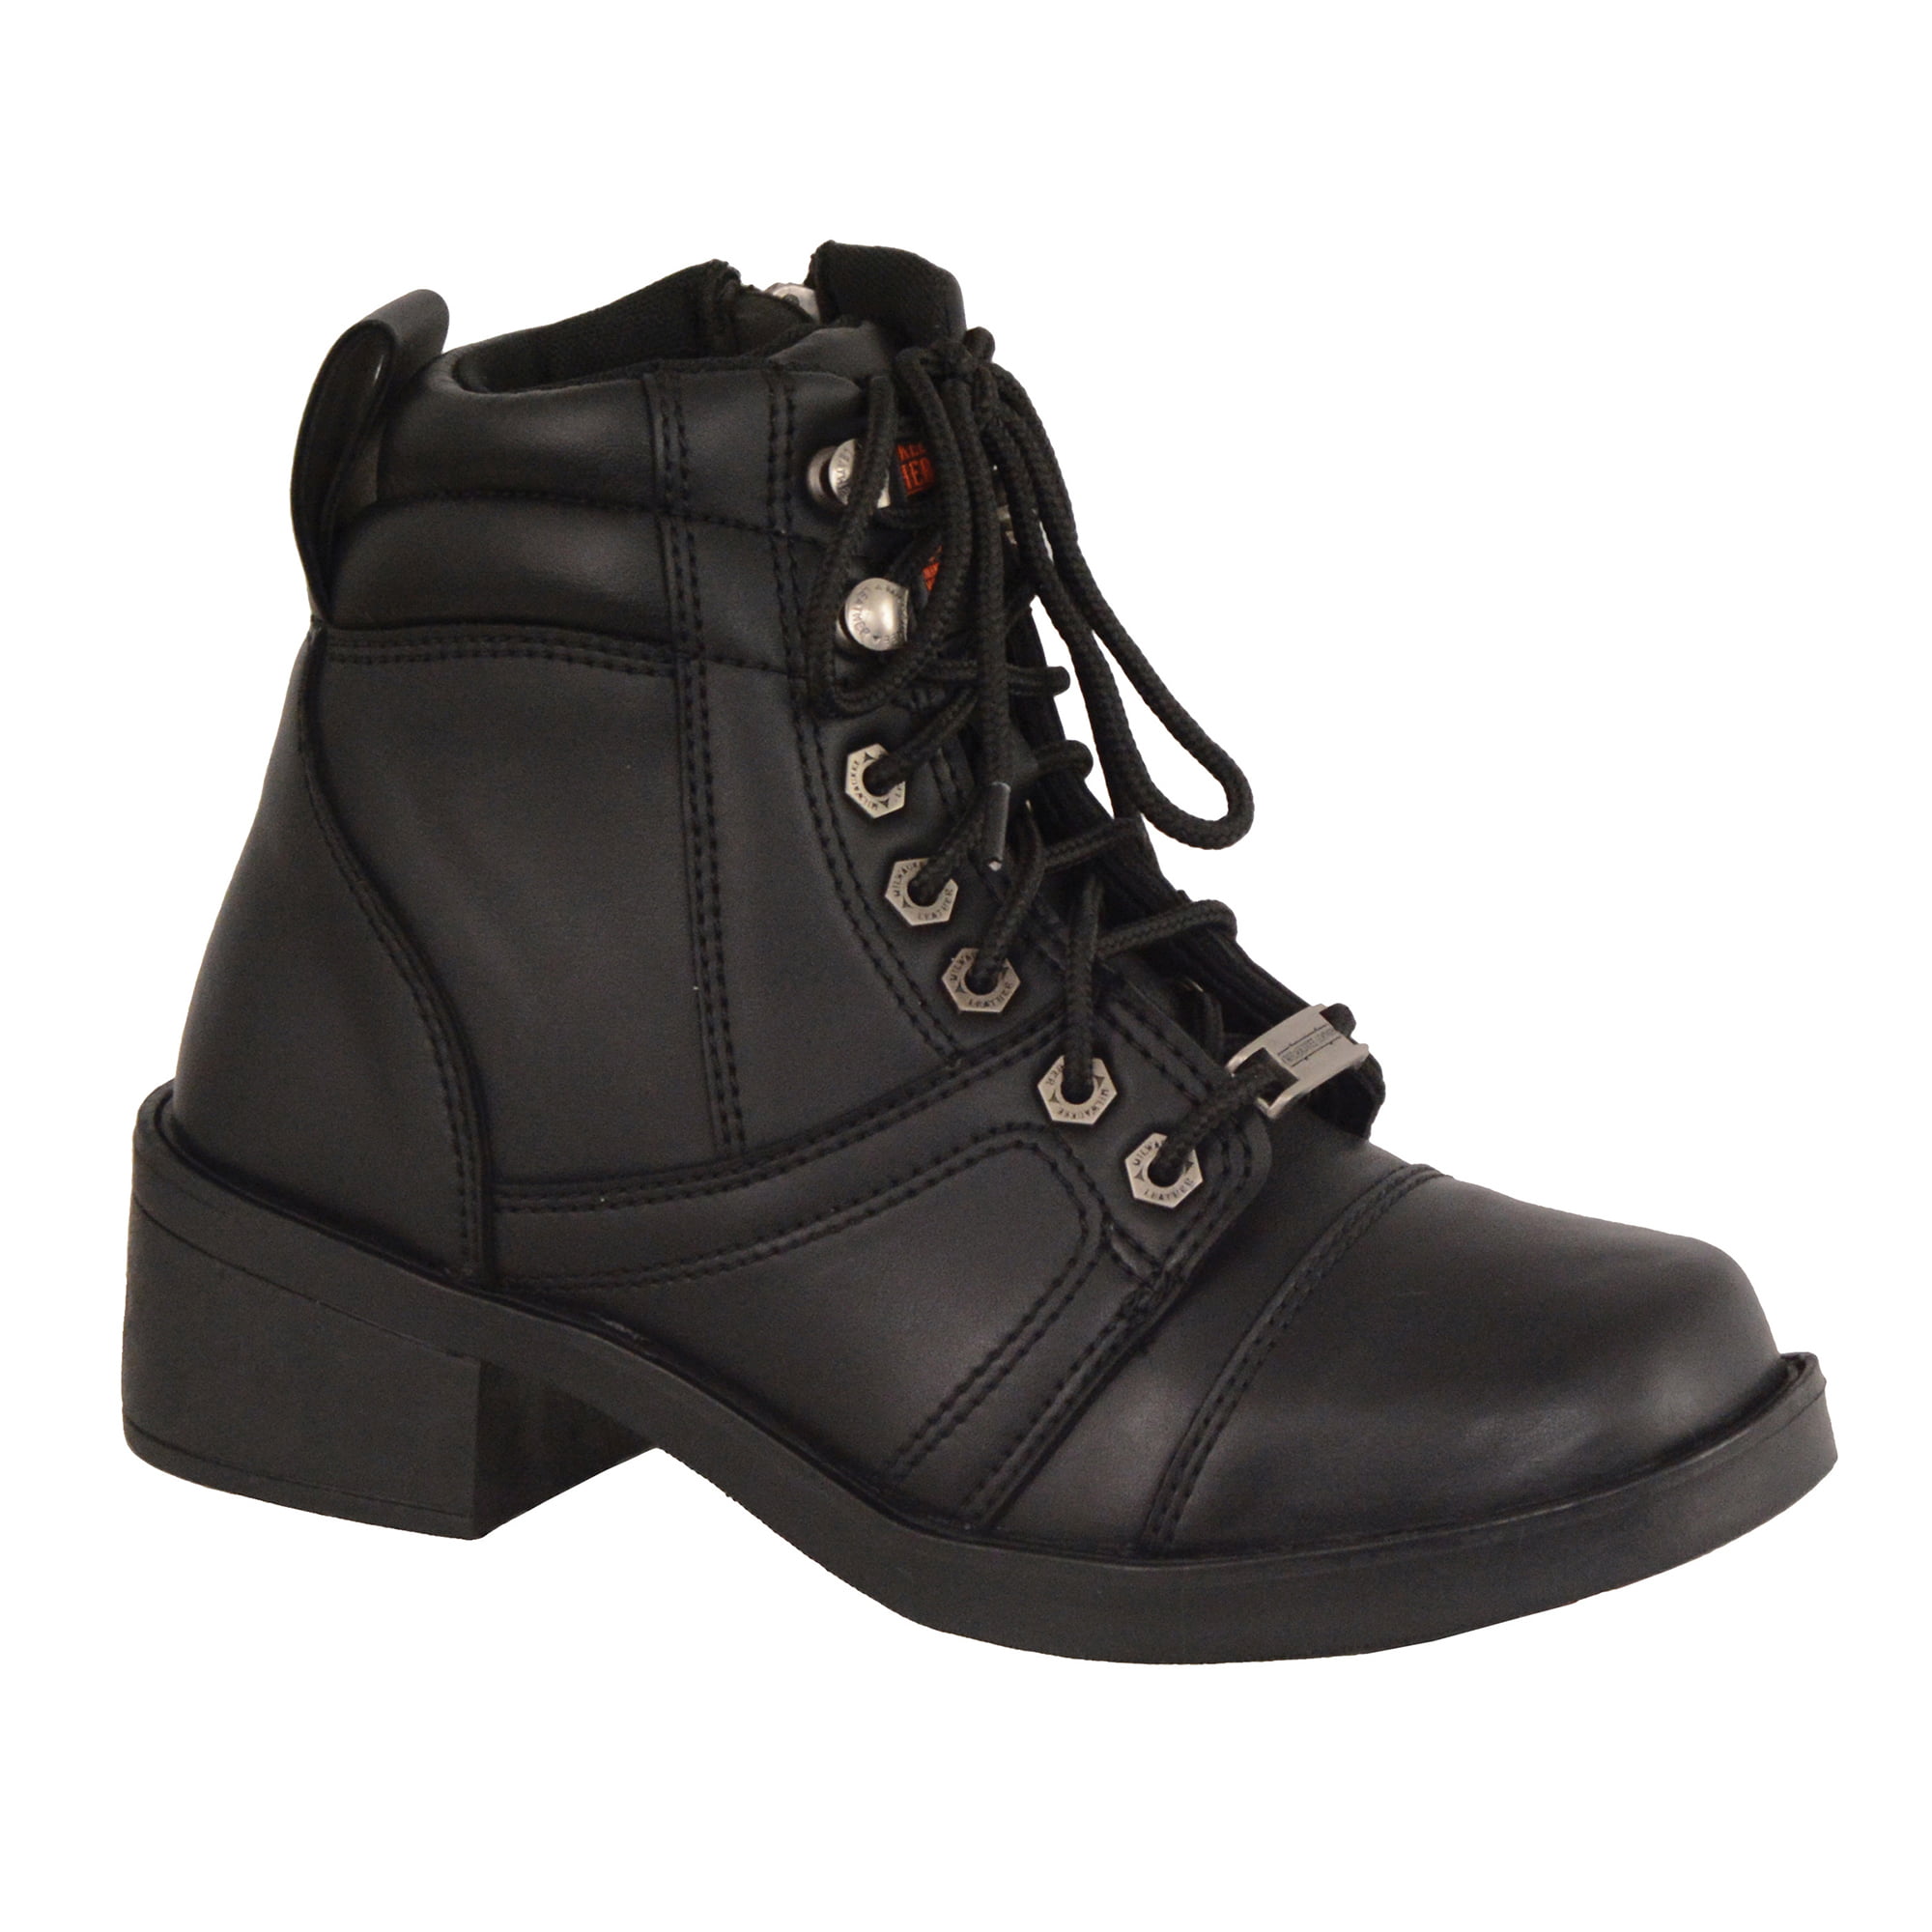 Black, Size 1.5 Milwaukee Leather Boys Youth Side Zipper Lace To Toe Boots MBK9255-BLK-1.5 